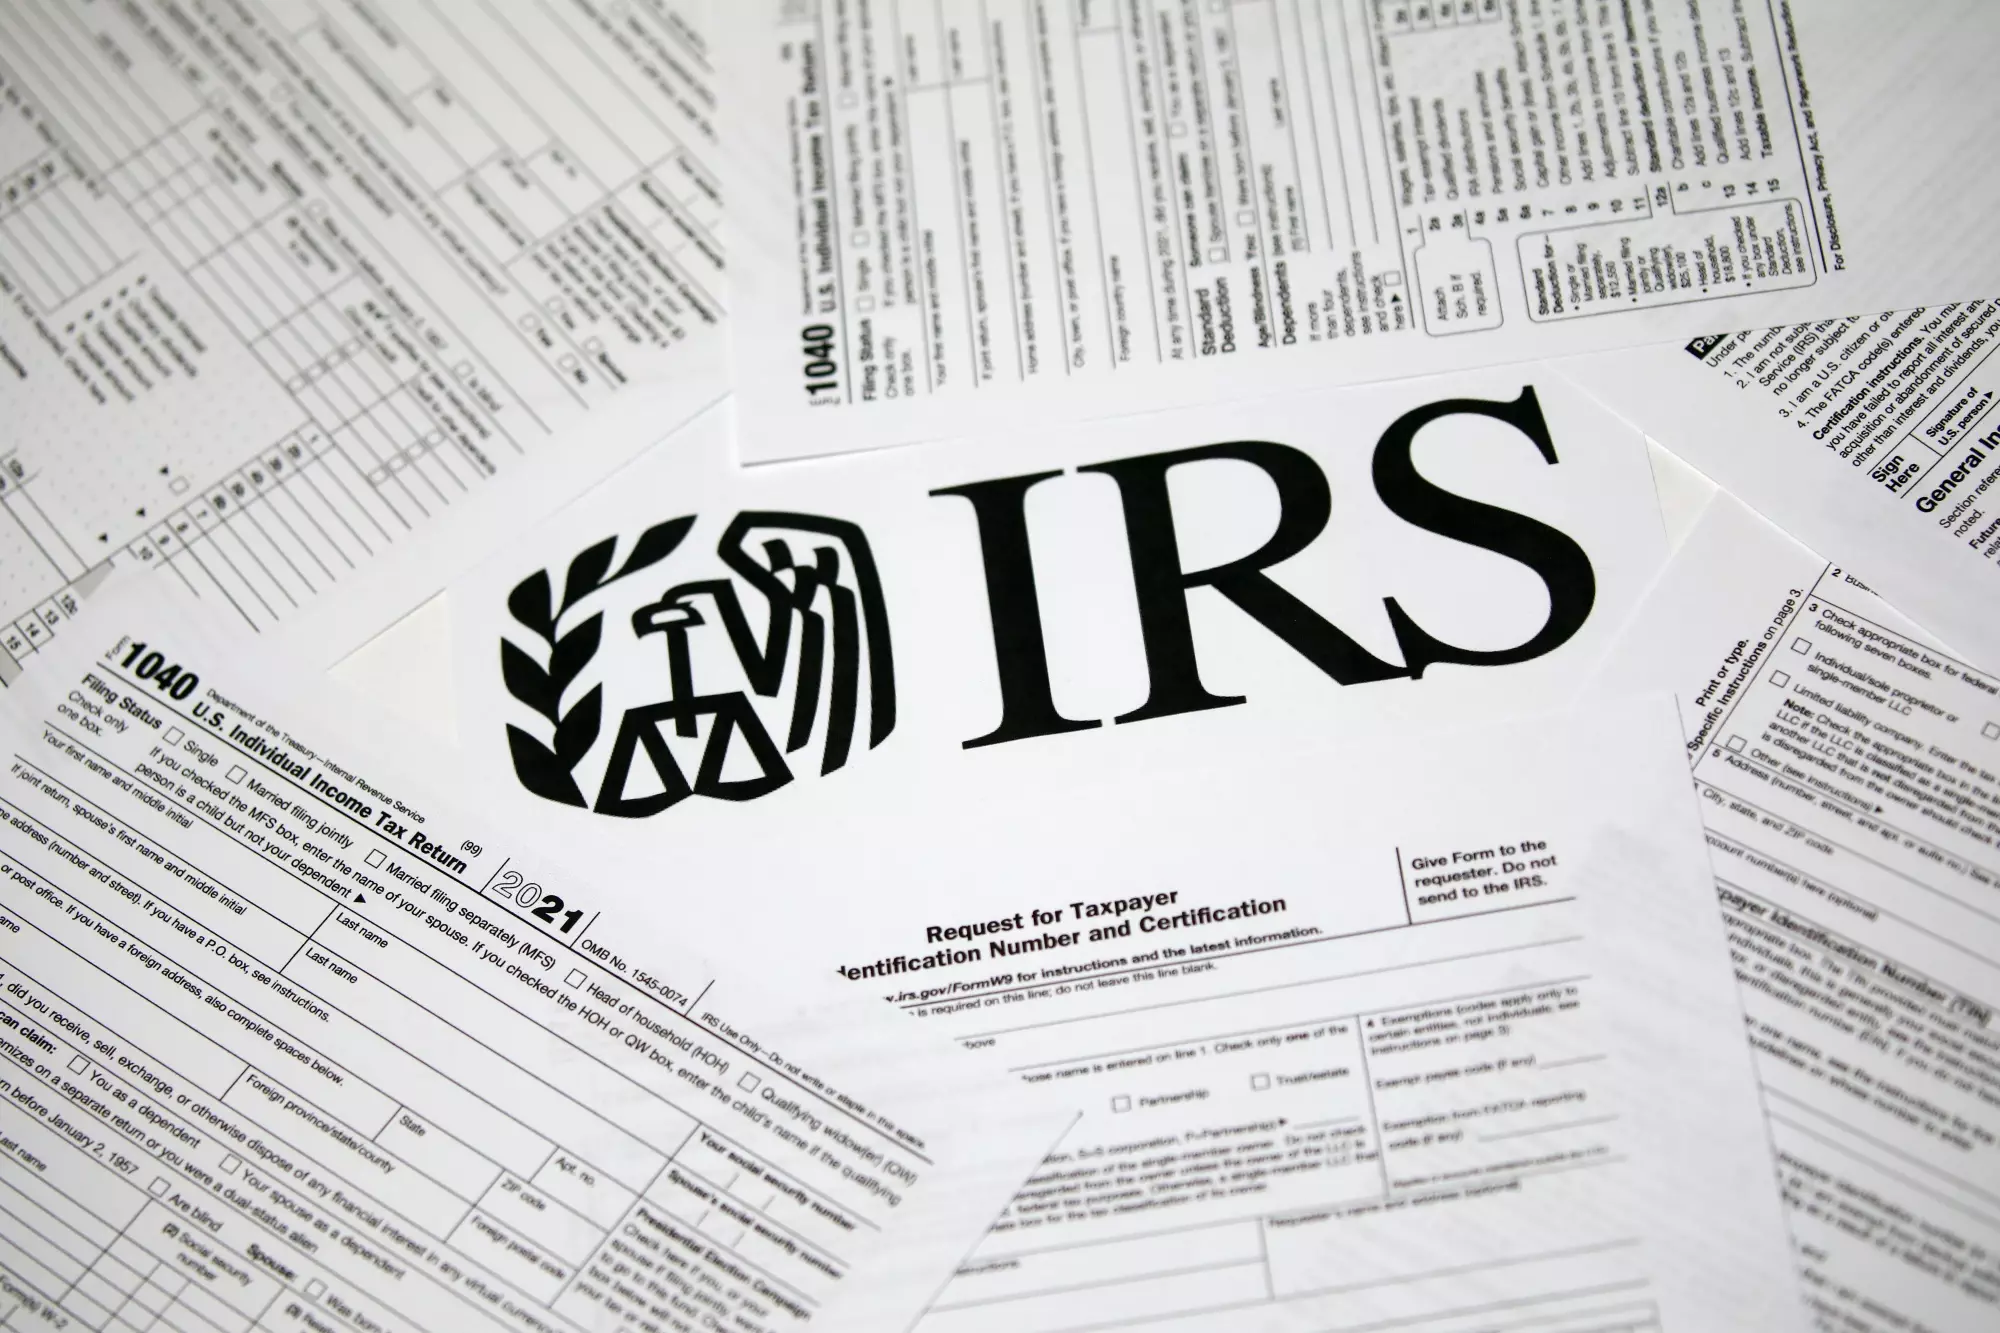 The IRS plans to get back taxes in millions of dollars owed by businesses. (Photo: Bloomberg.com)